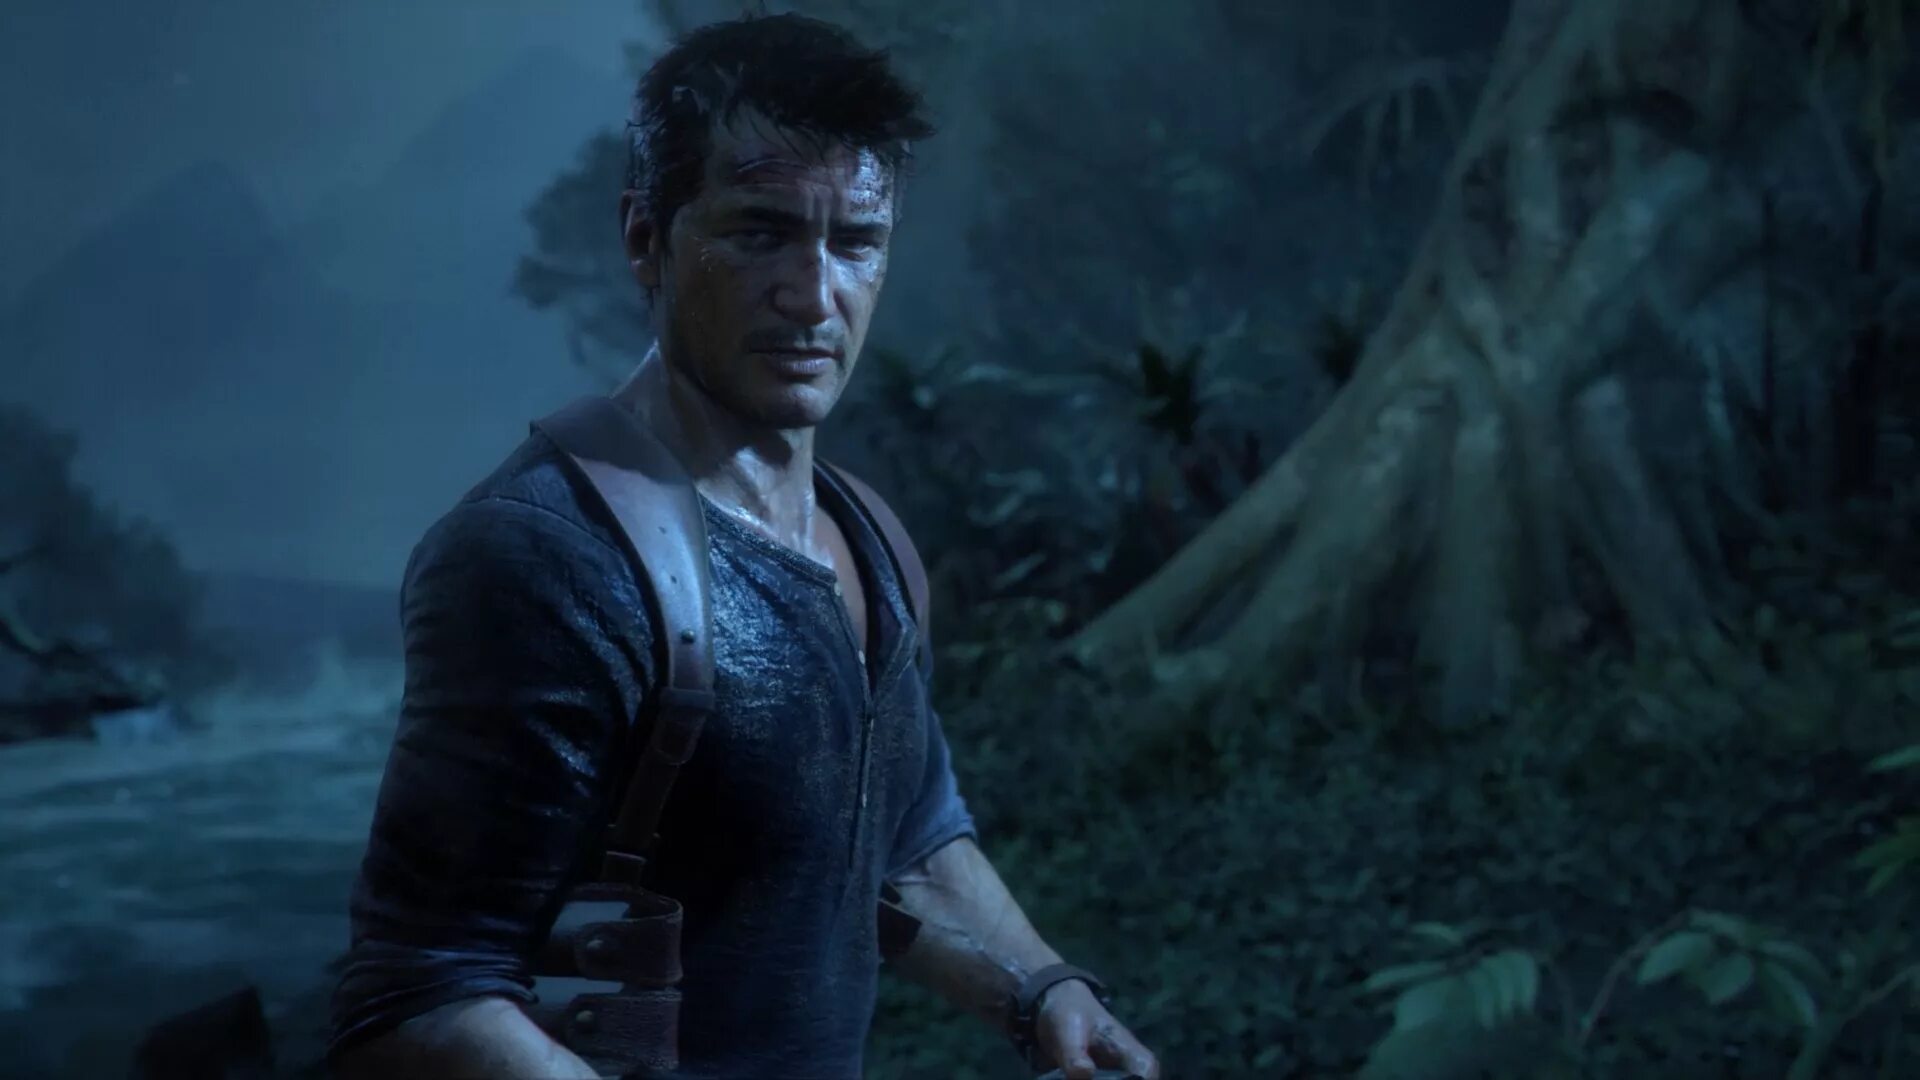 Uncharted 4. Нолан Норт Натан Дрейк. Uncharted 4: a Thief's end Drake. Nathan Drake Uncharted 4.